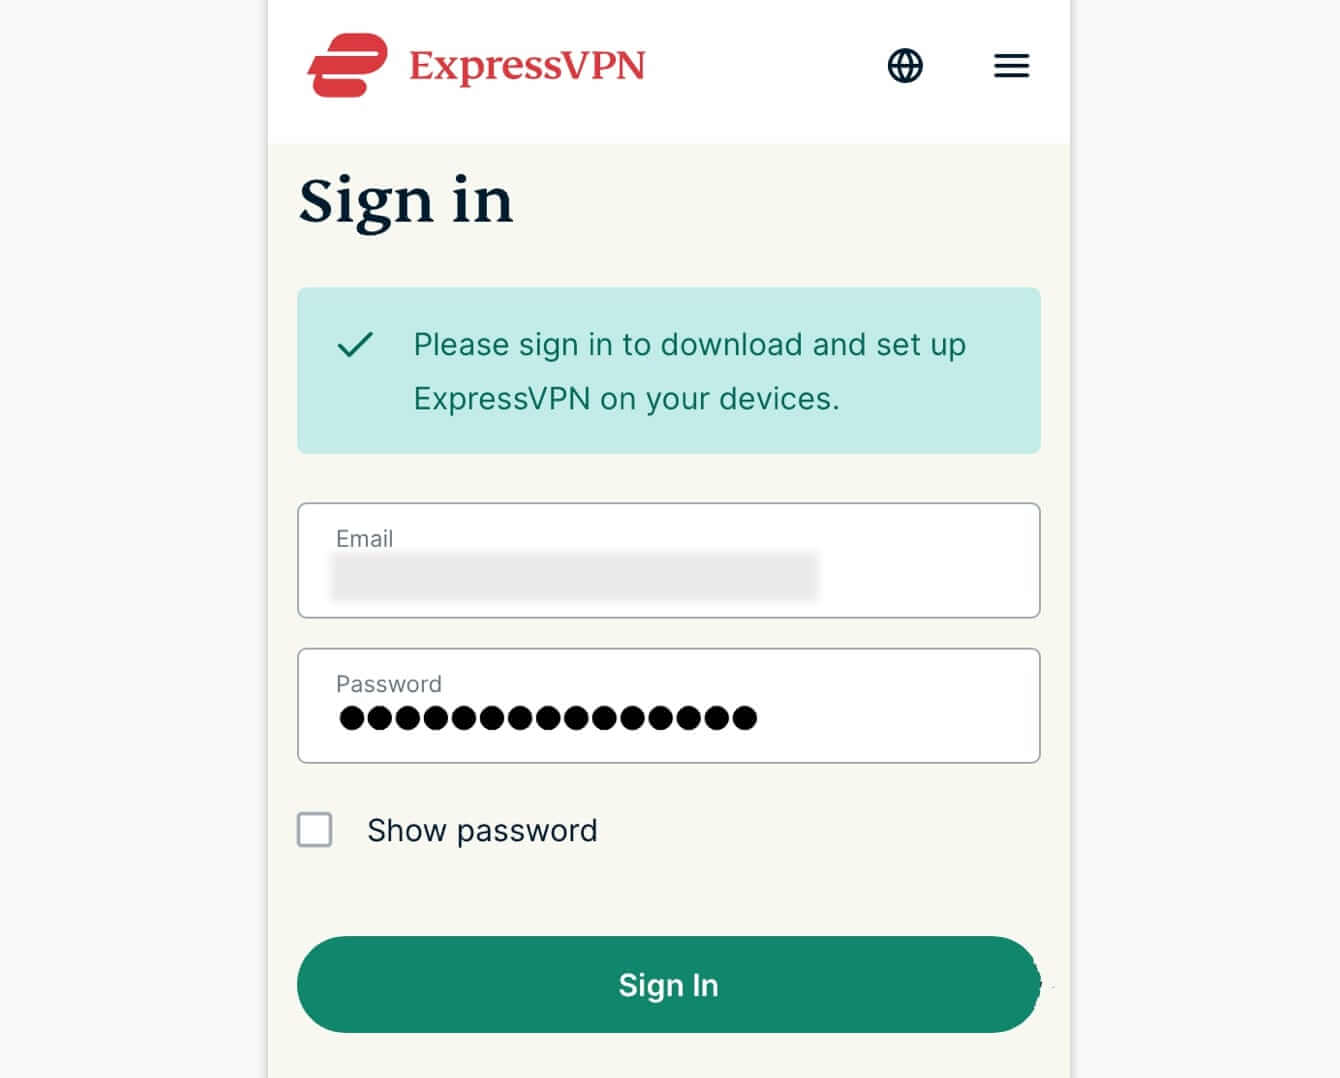 expressvpn-account-mobile-tap-sign-in (1)